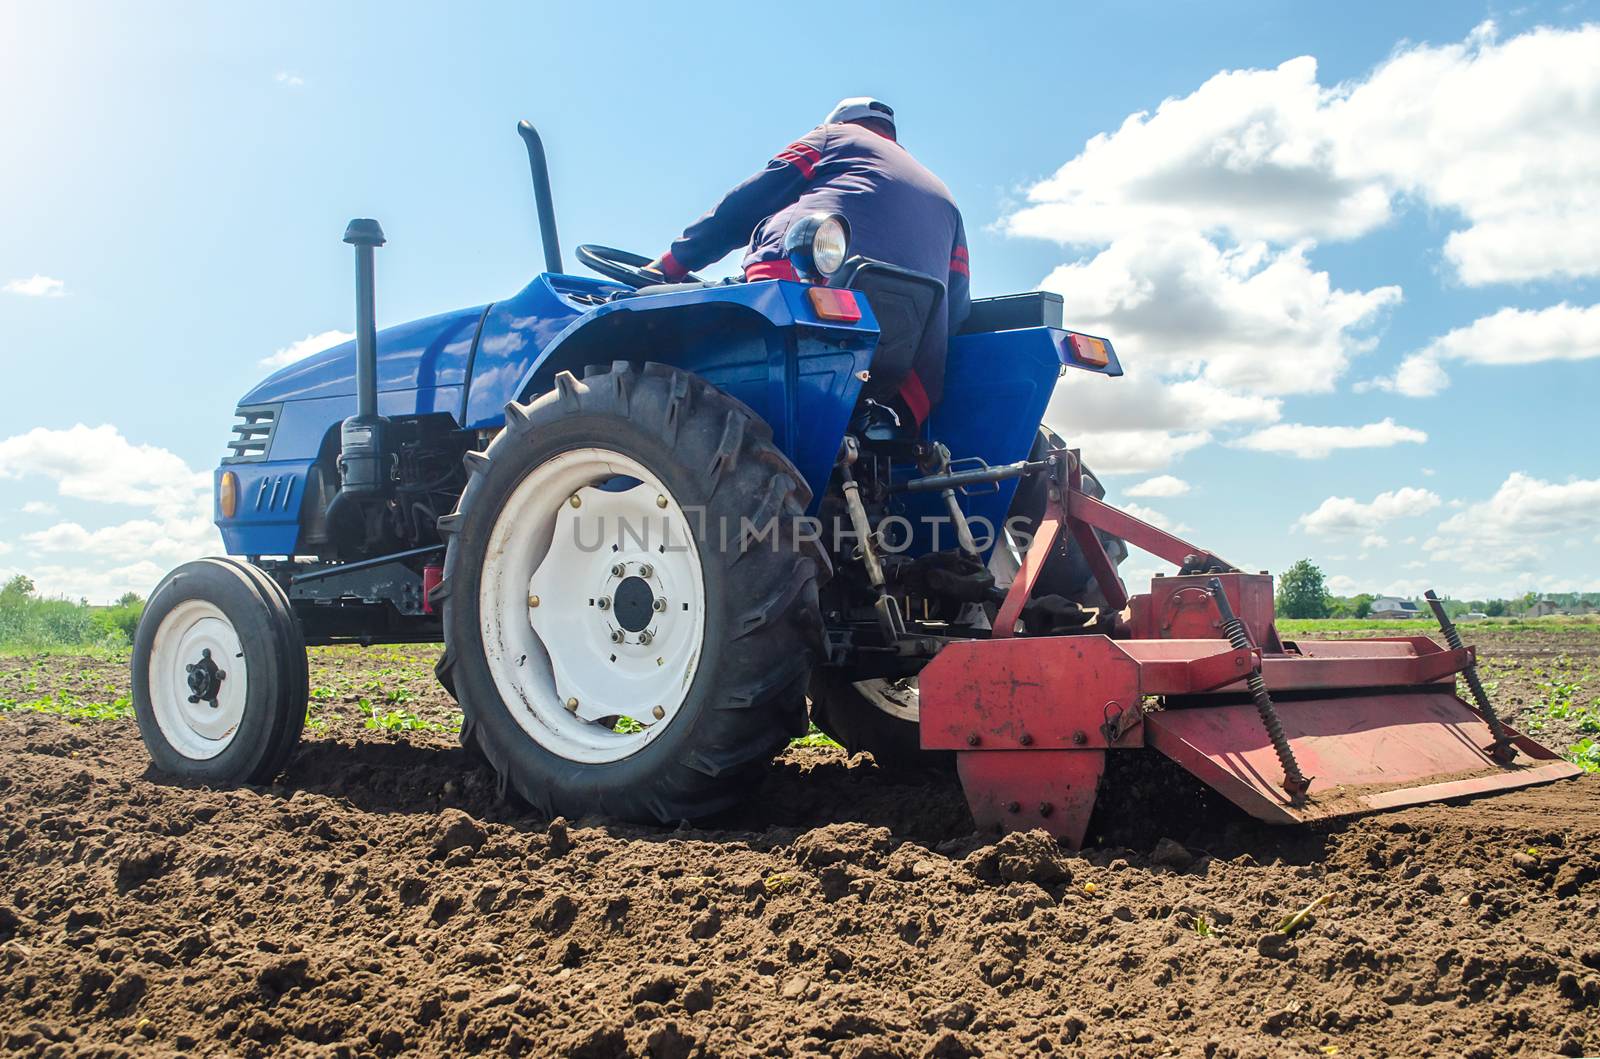 Farmer on a tractor with a milling machine processes loosens soil in the farm field. Preparation for new crop planting. Grind and mix soil on plantation. Loosening surface, cultivating the land. by iLixe48